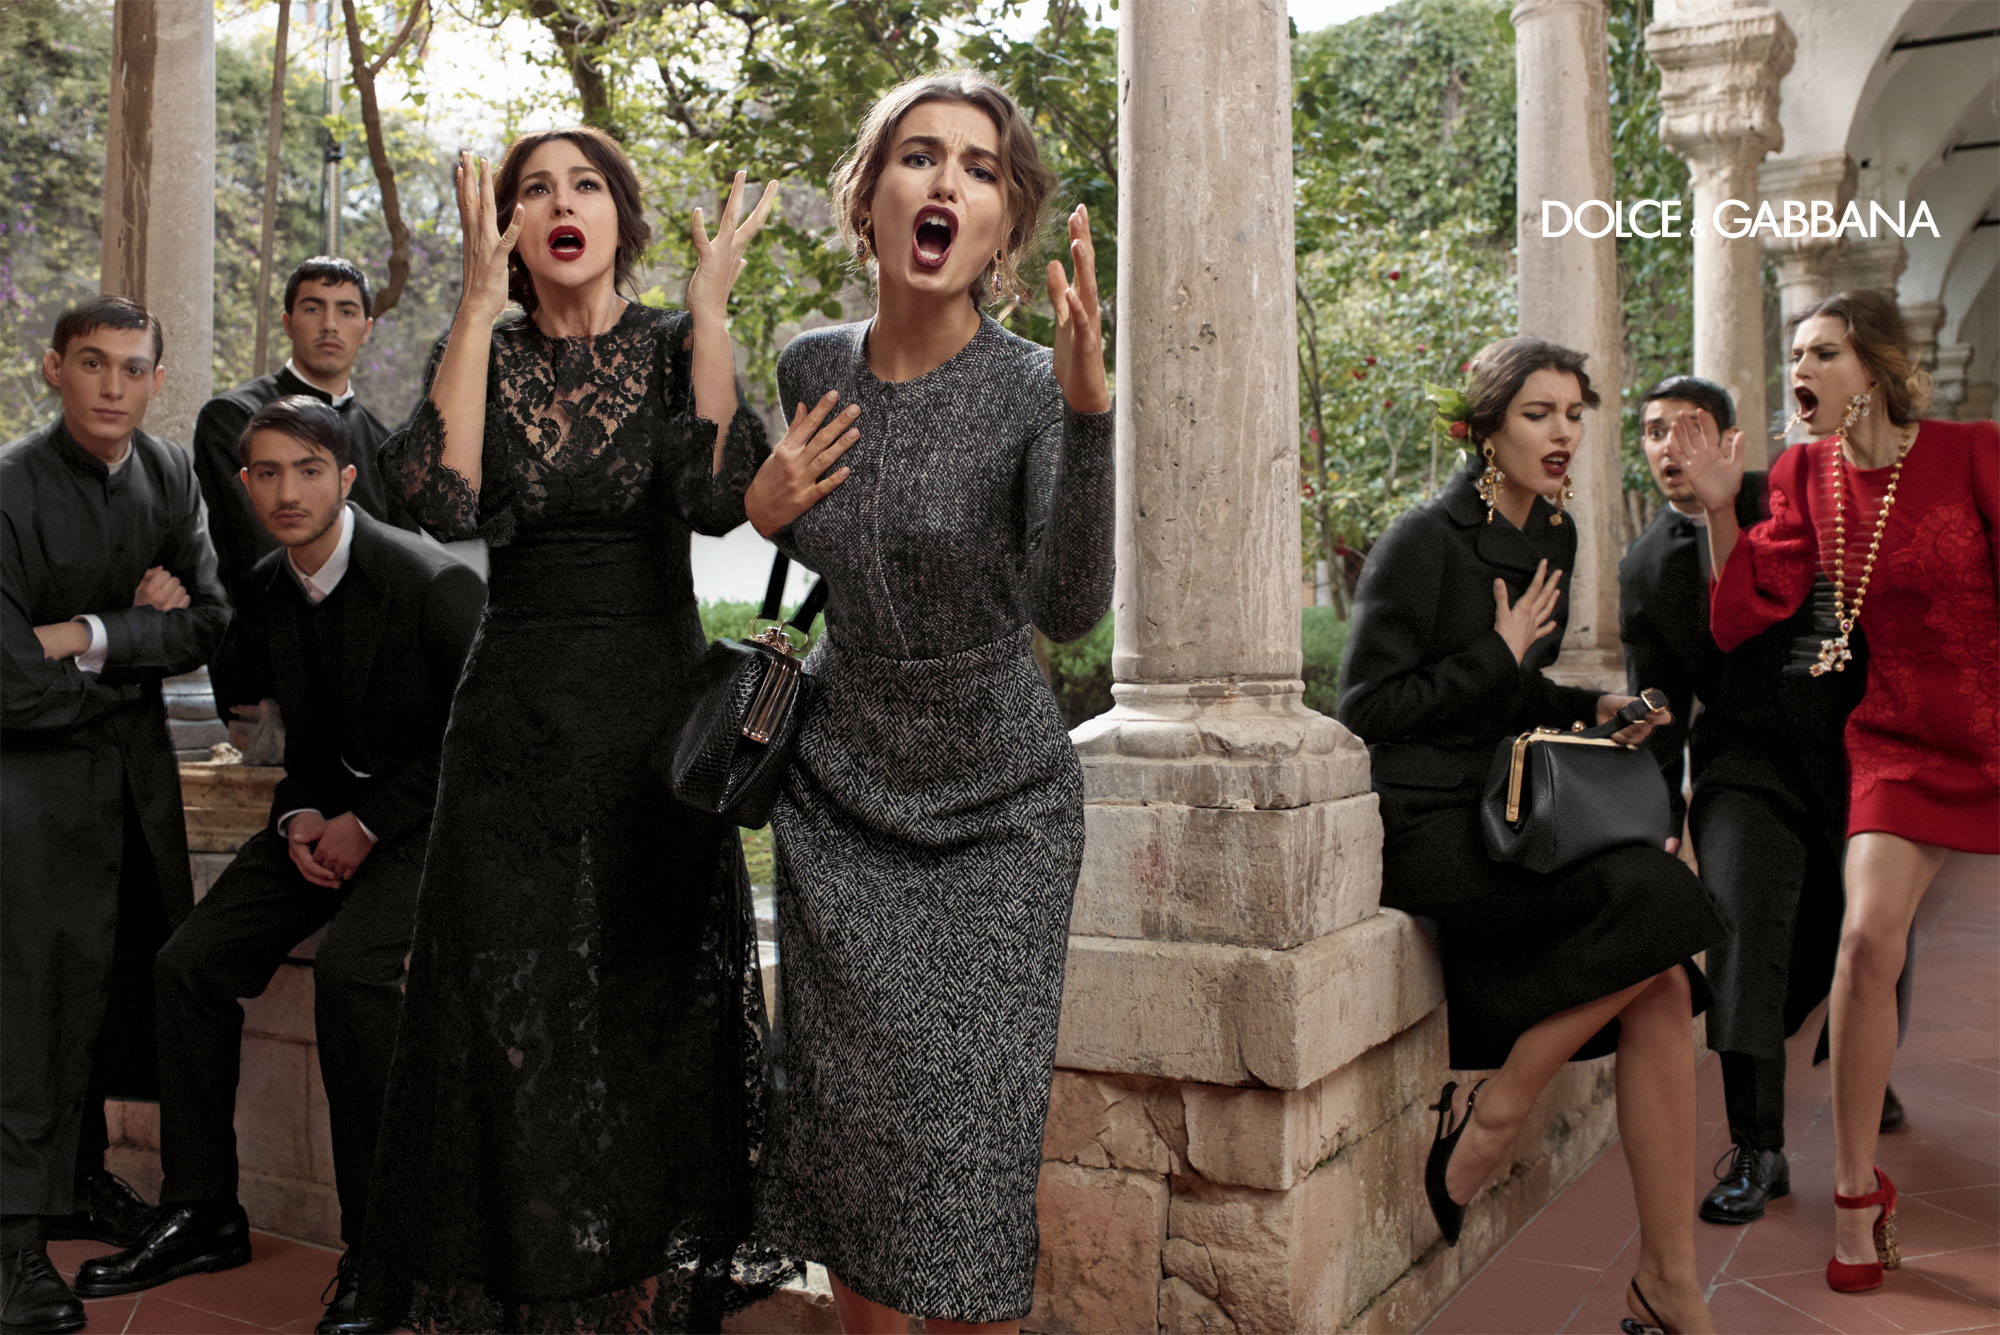 Dolce and Gabbana's Ad Campaign A/W 13 